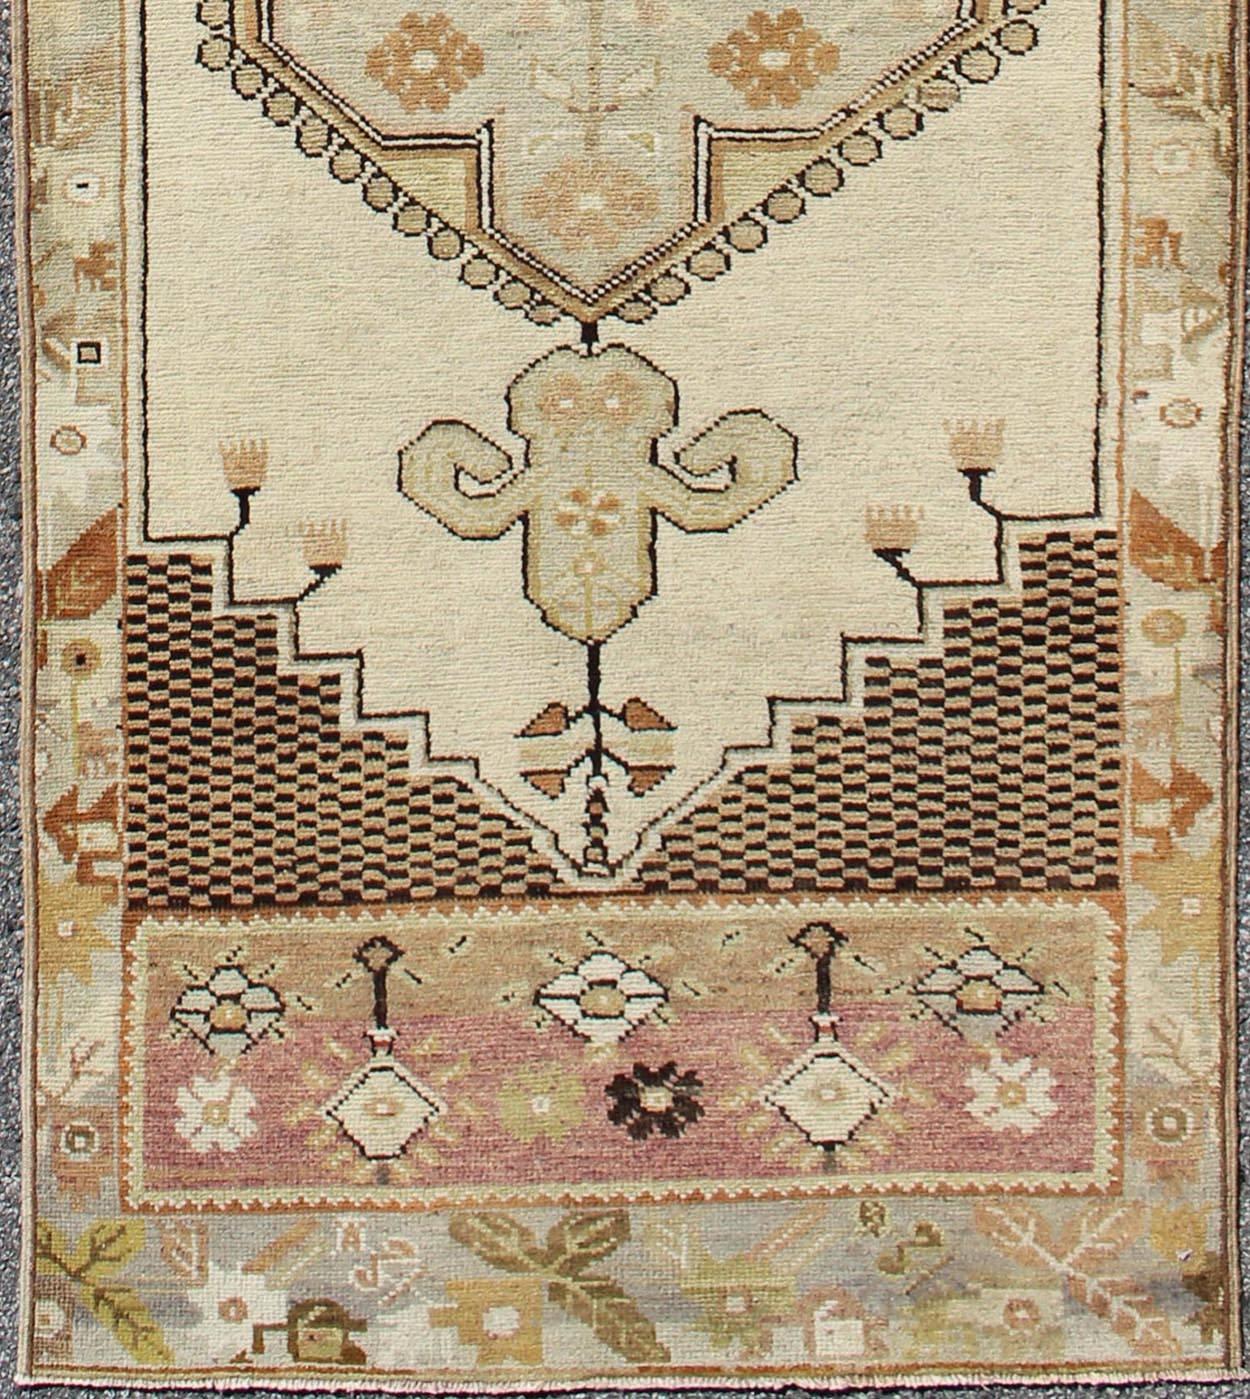 Regal vintage Turkish Oushak rug with dual medallion design in nude and brown, rug tu-ugu-95159, country of origin / type: Turkey / Oushak, circa 1940

This vintage Turkish Oushak carpet (circa mid-20th century) features a tribal, central